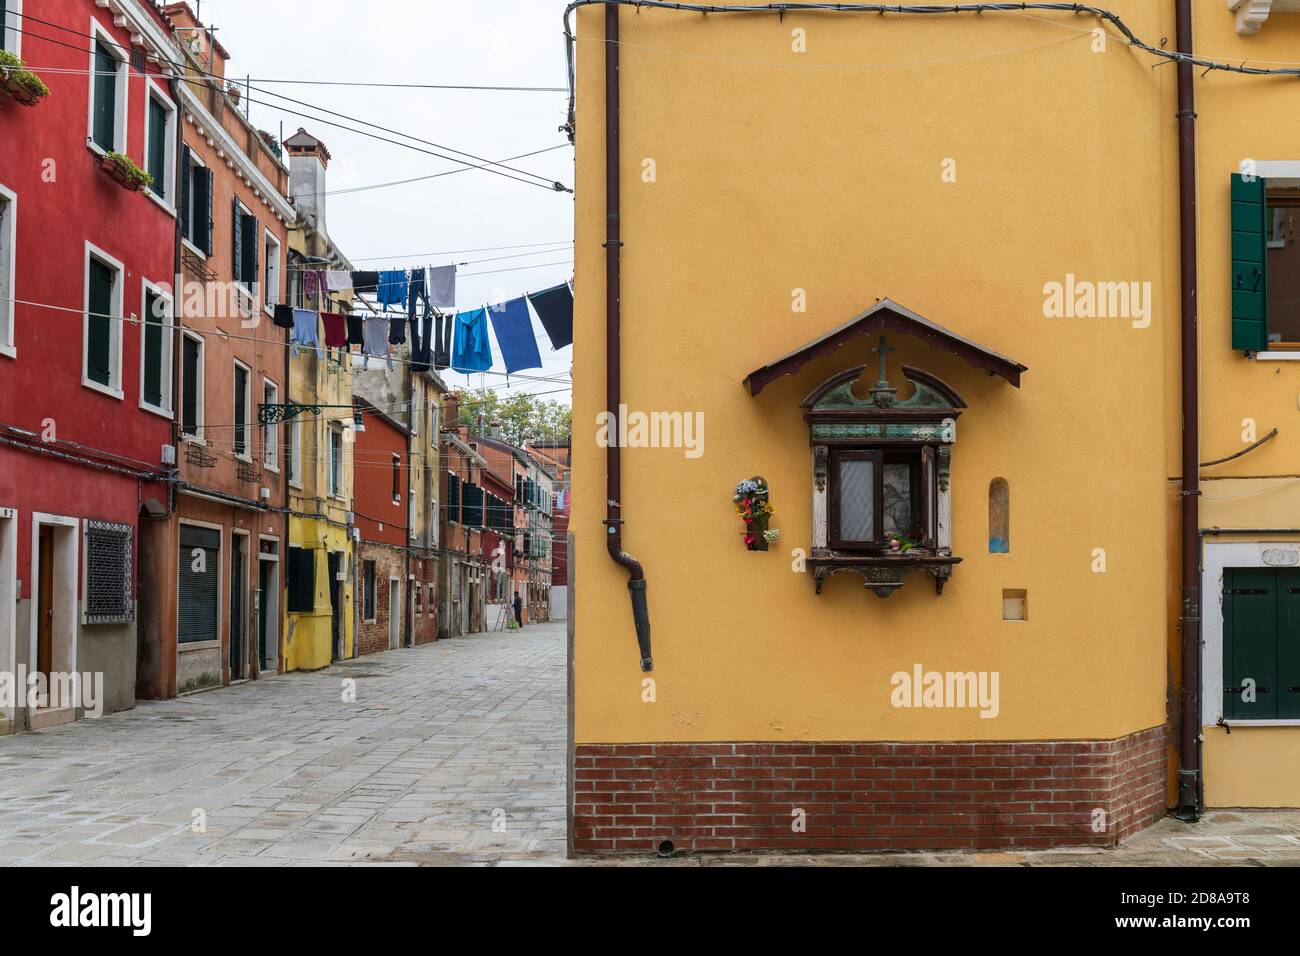 Washing hanging out to dry from colourful homes in the Castello region of Venice, Italy 2020 Stock Photo